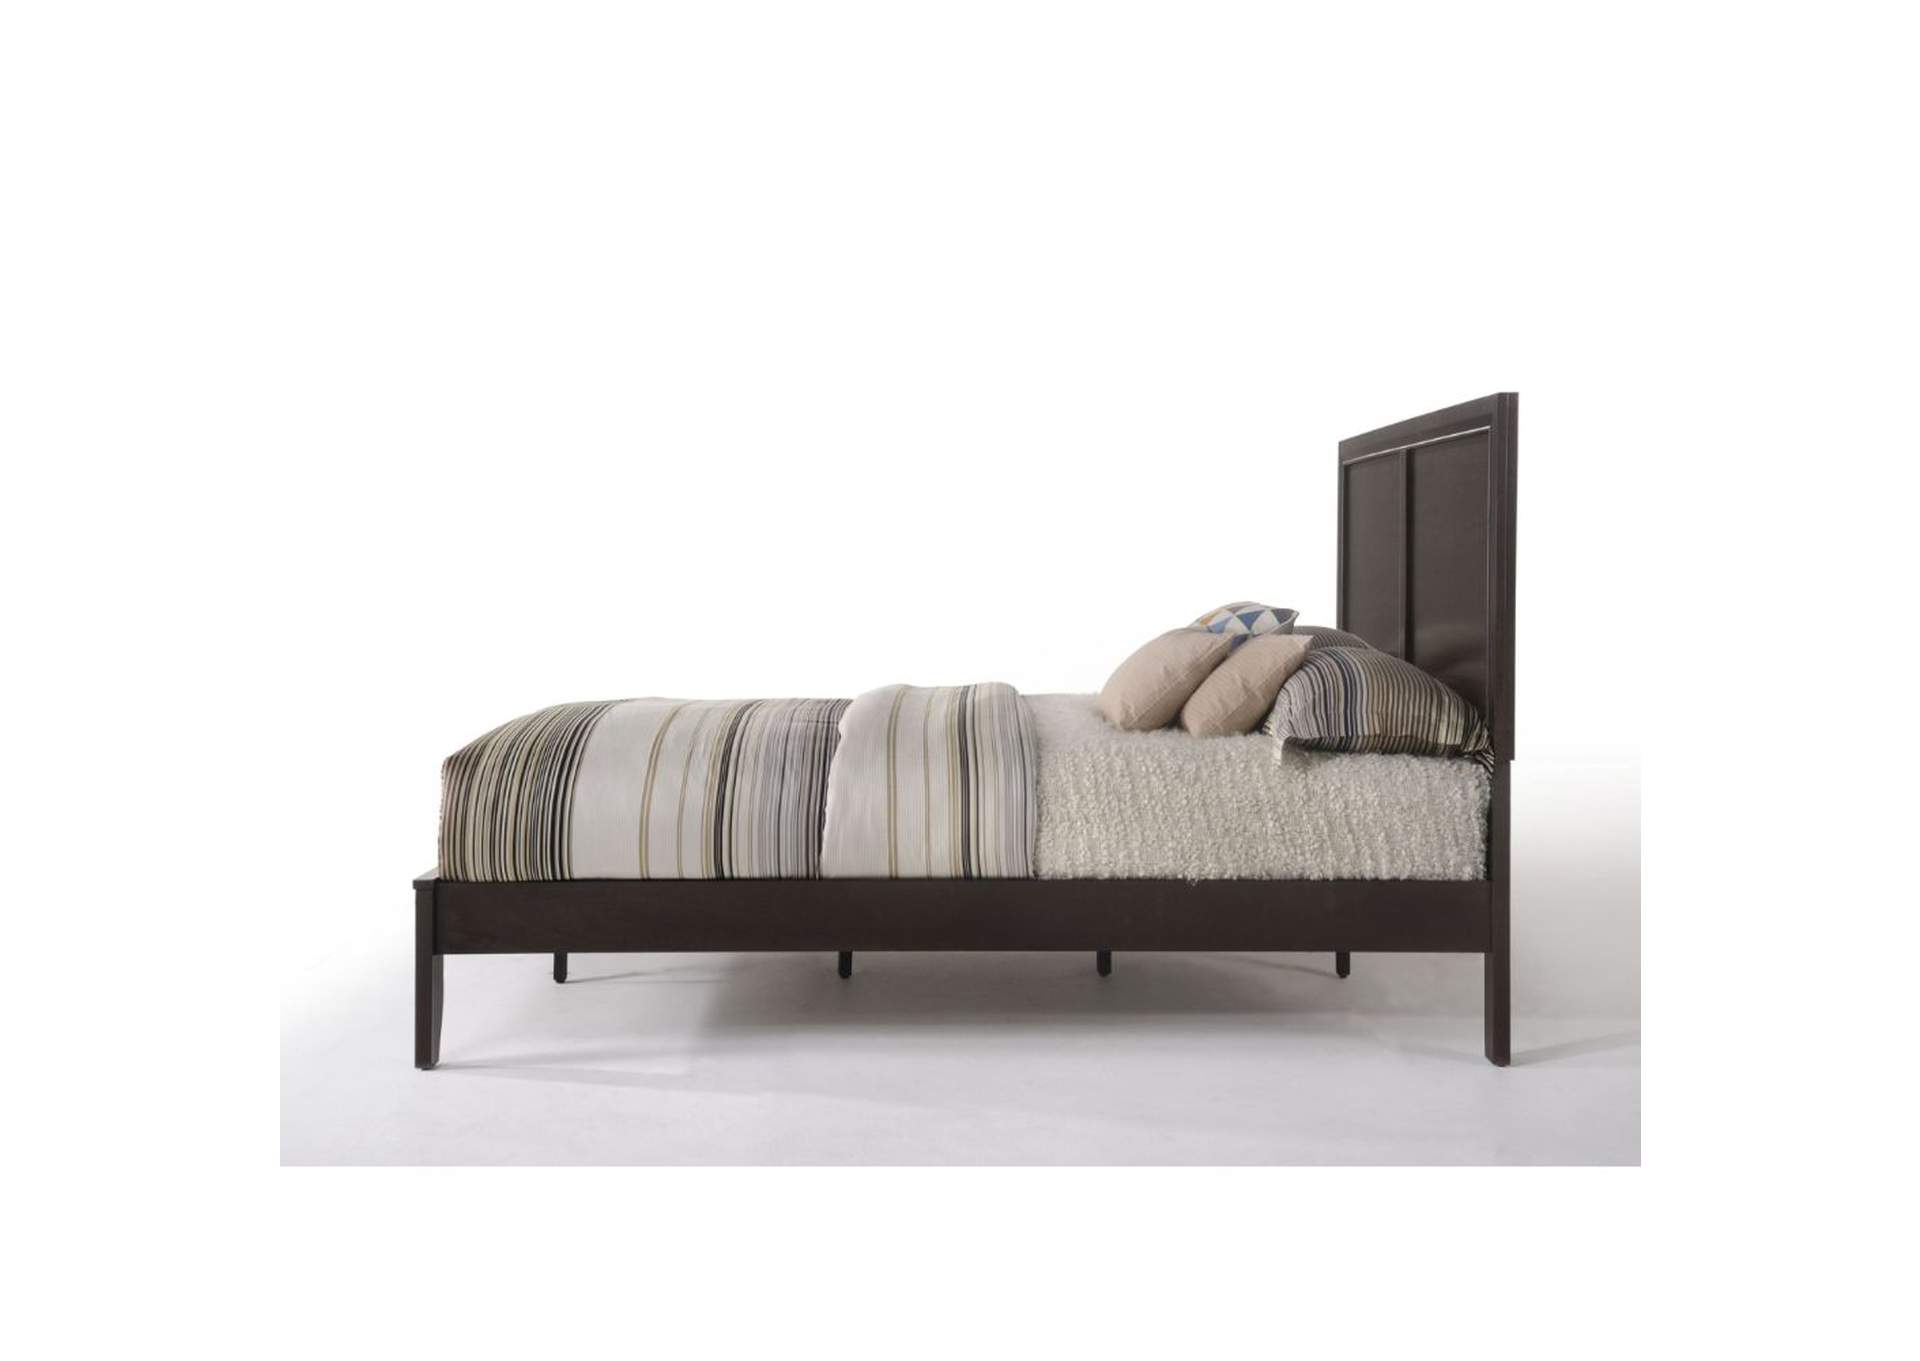 Madison Queen Bed,Acme